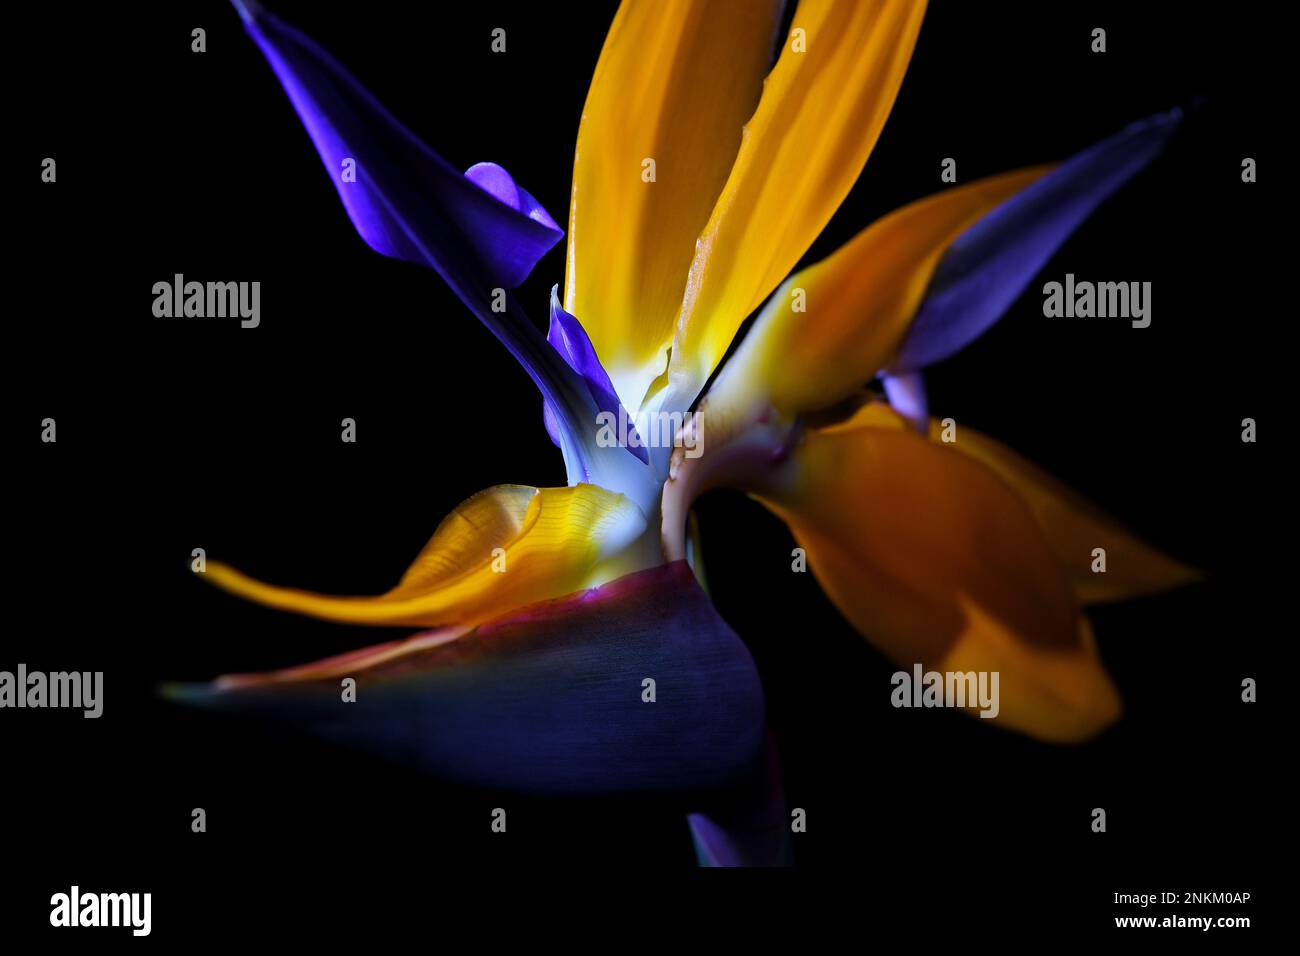 A close-up abstract angle of a beautiful vibrant blue and orange Bird of Paradise -Sterlitzia reginae- flower isolated on a black background Stock Photo